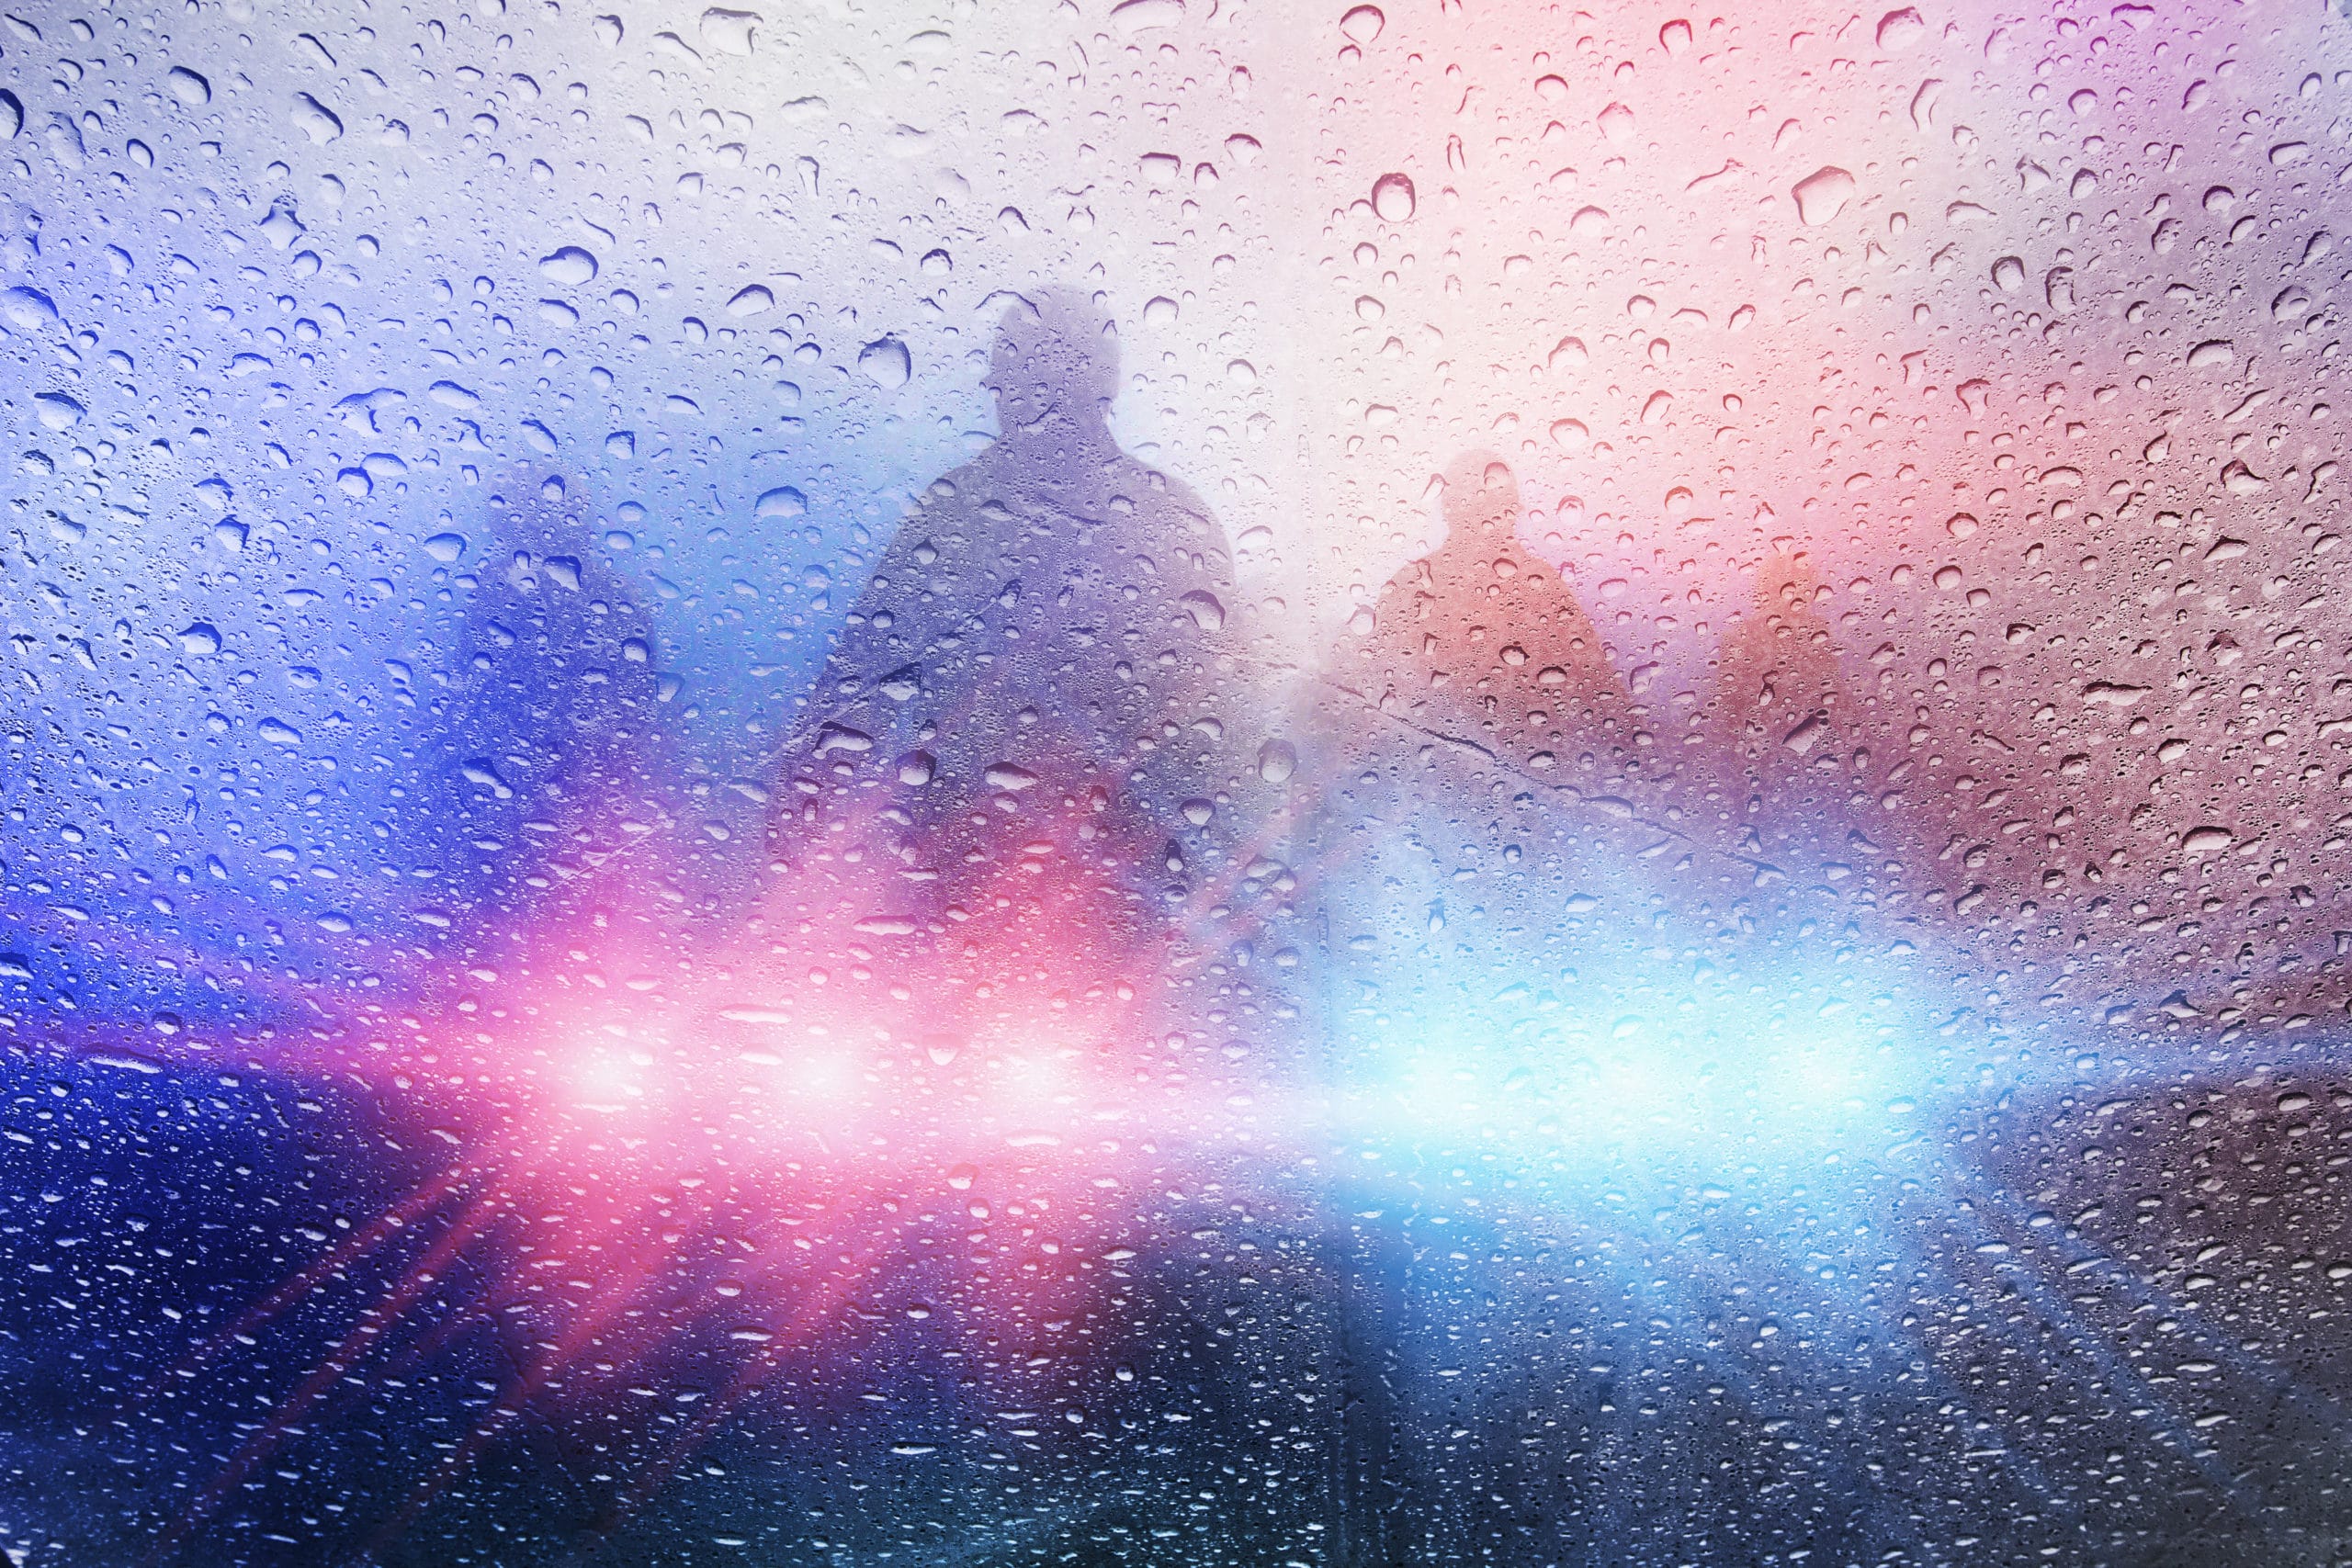 Police,Crime,Scene,,Rain,Background,With,Police,Lights,Police Pursuits